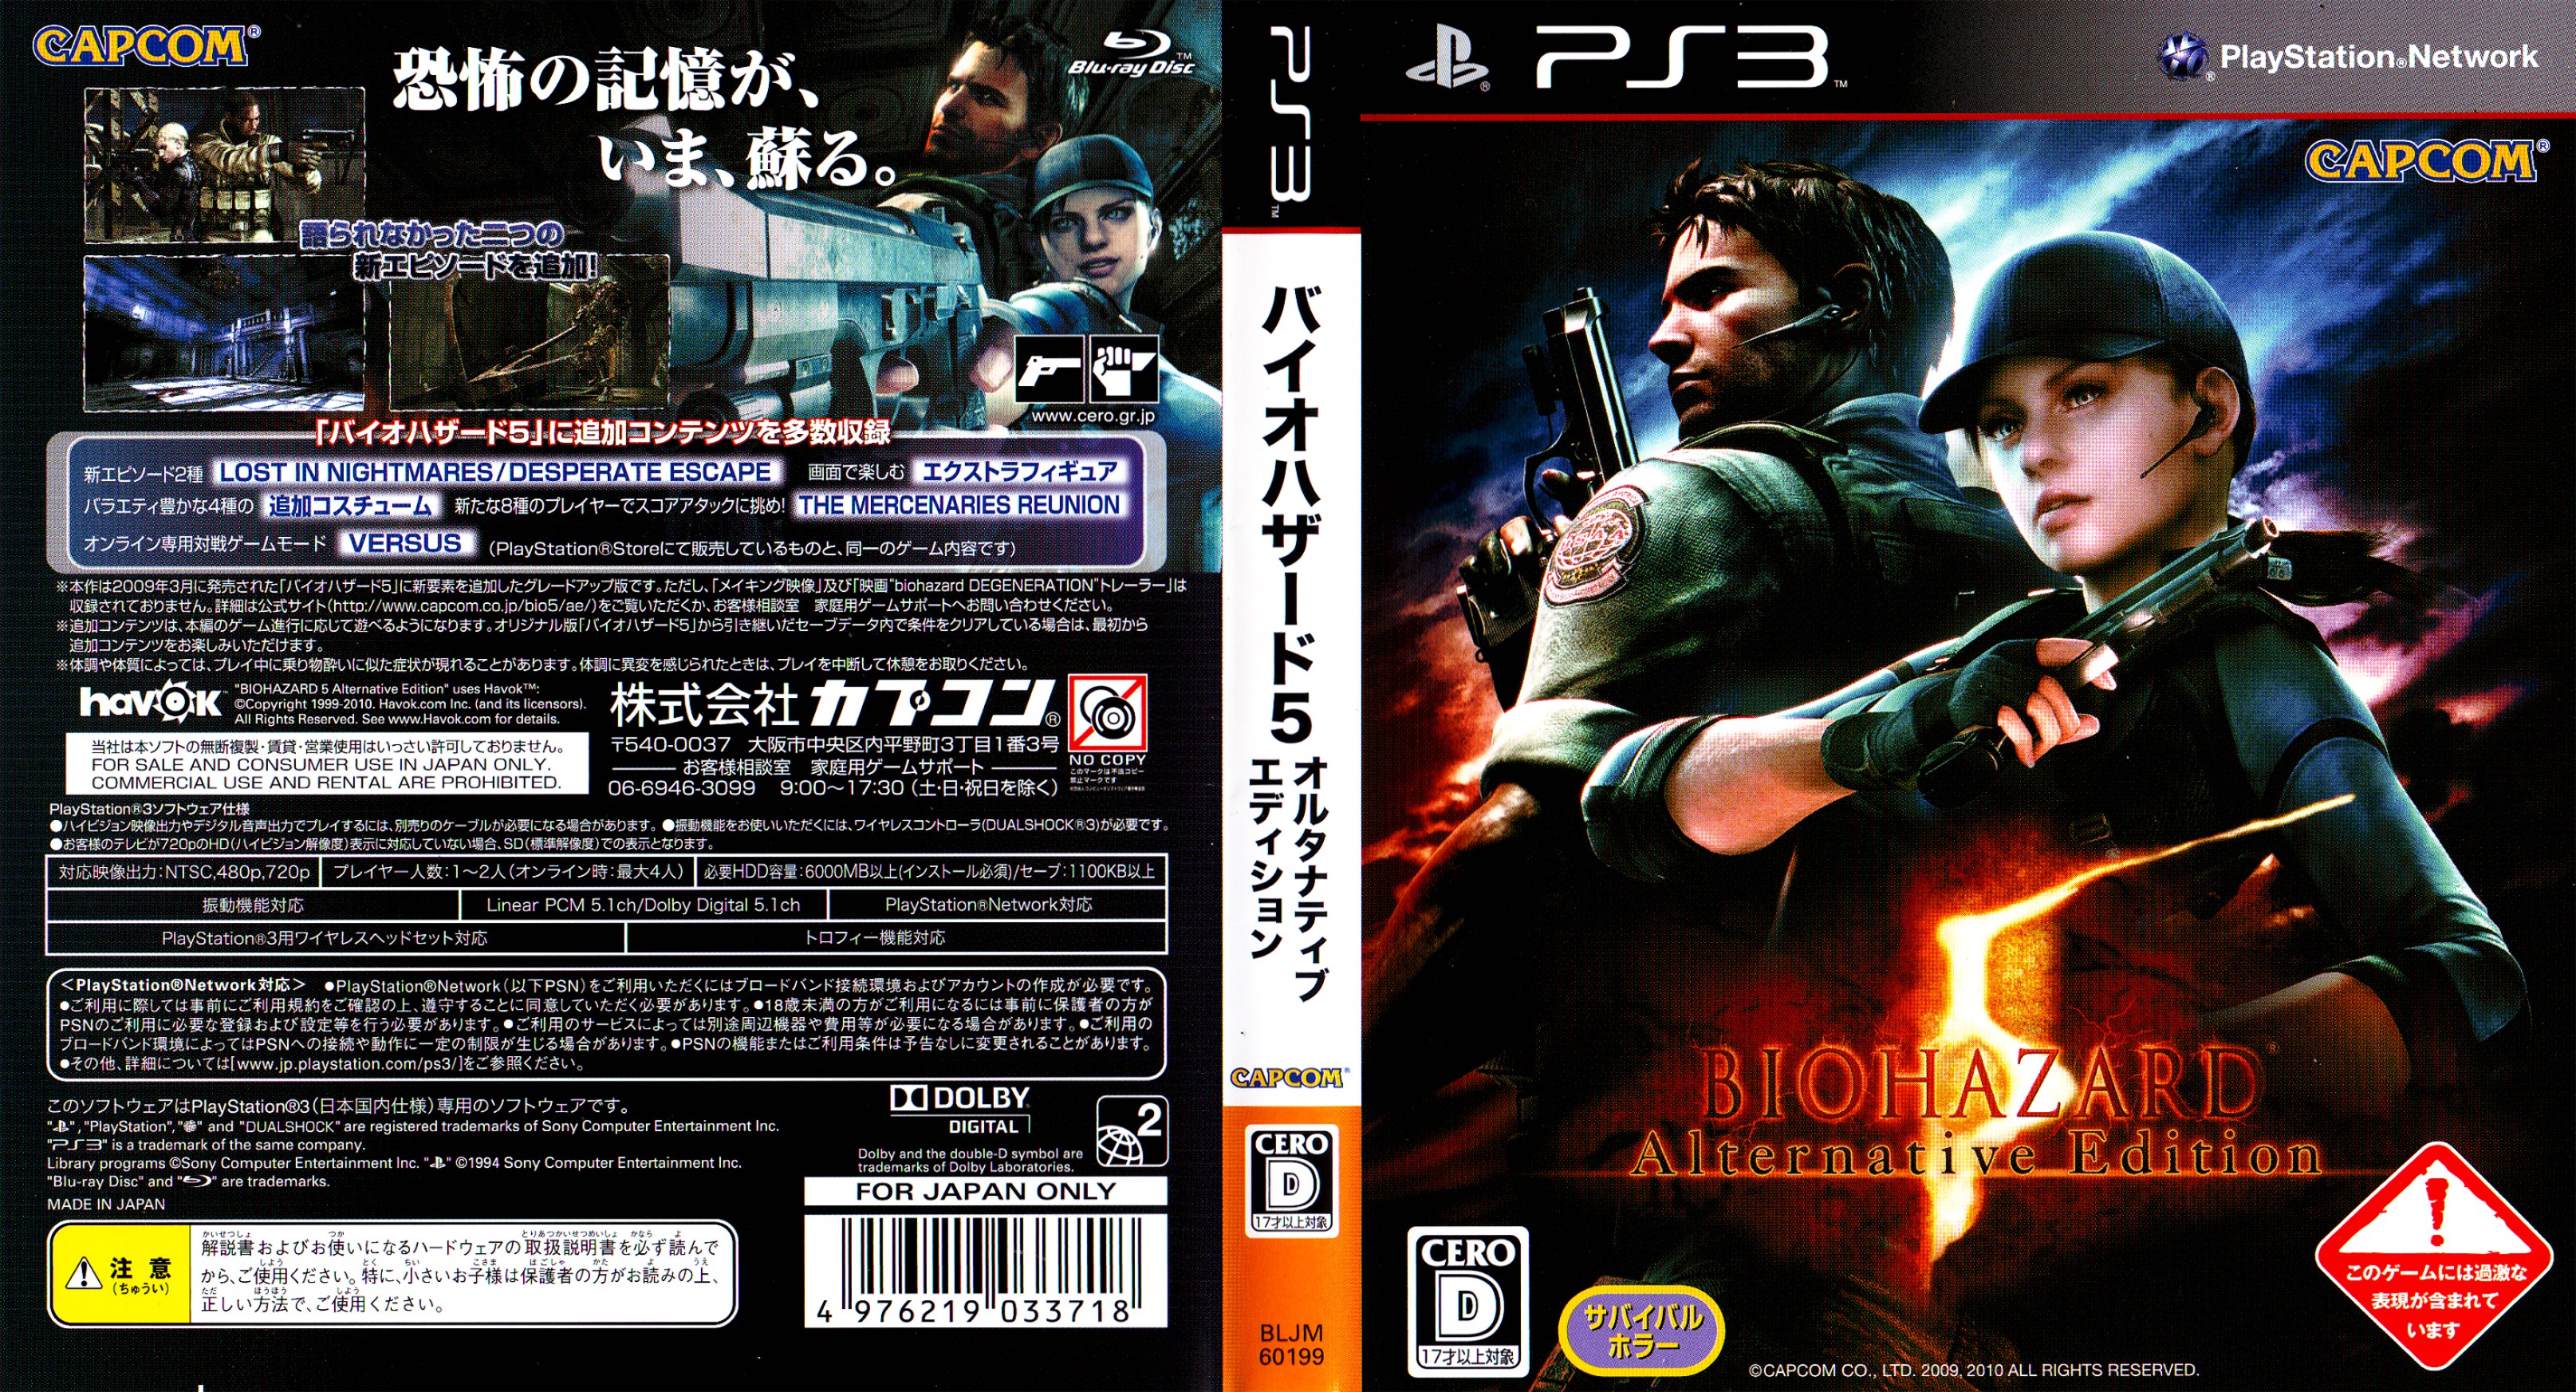 Resident Evil 5 Gold Move Edition Ps3 Torrent